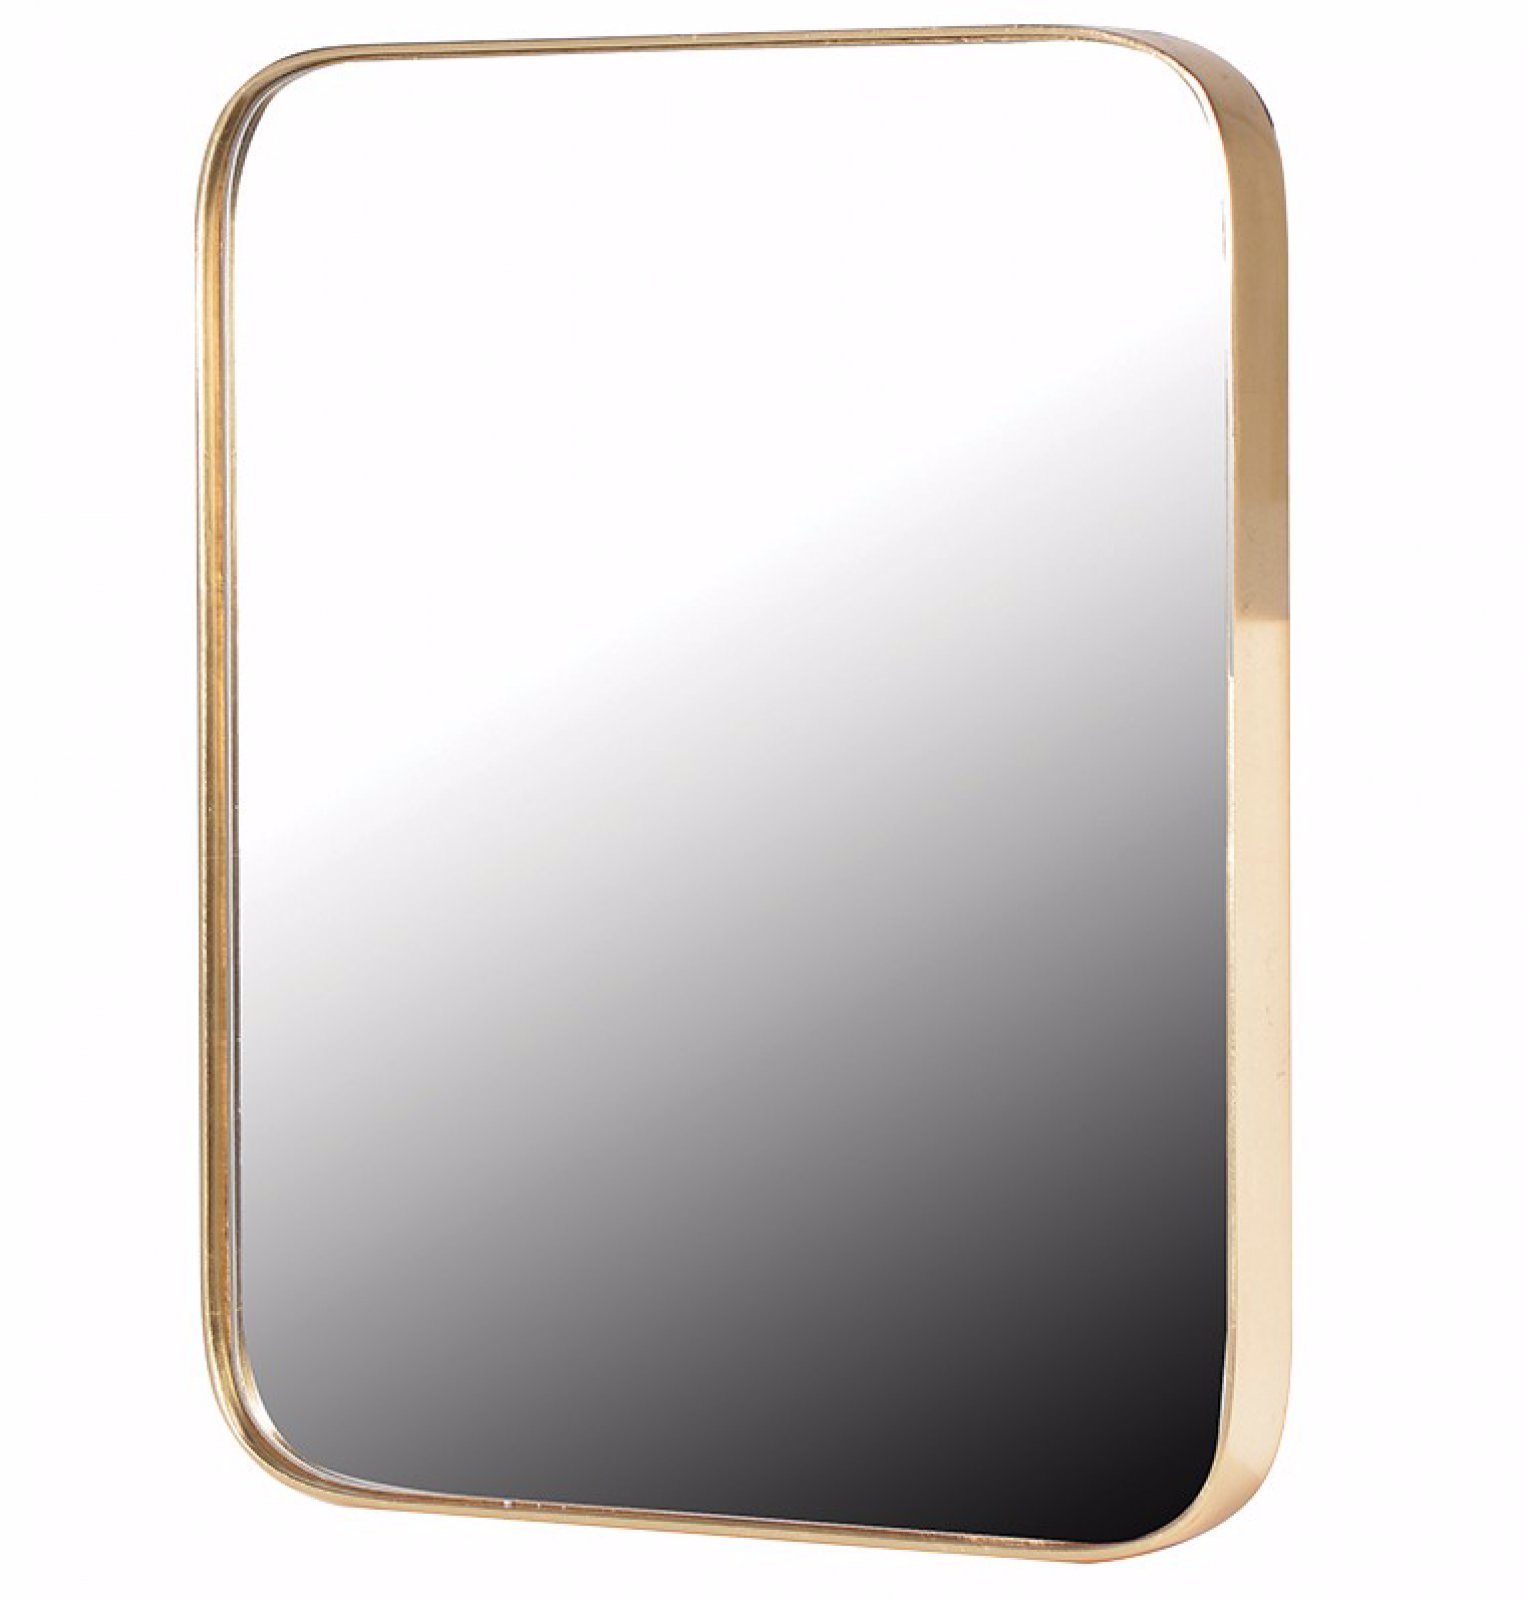 Gold Rectangular Mirror With Curved Frame 51x40.5cm